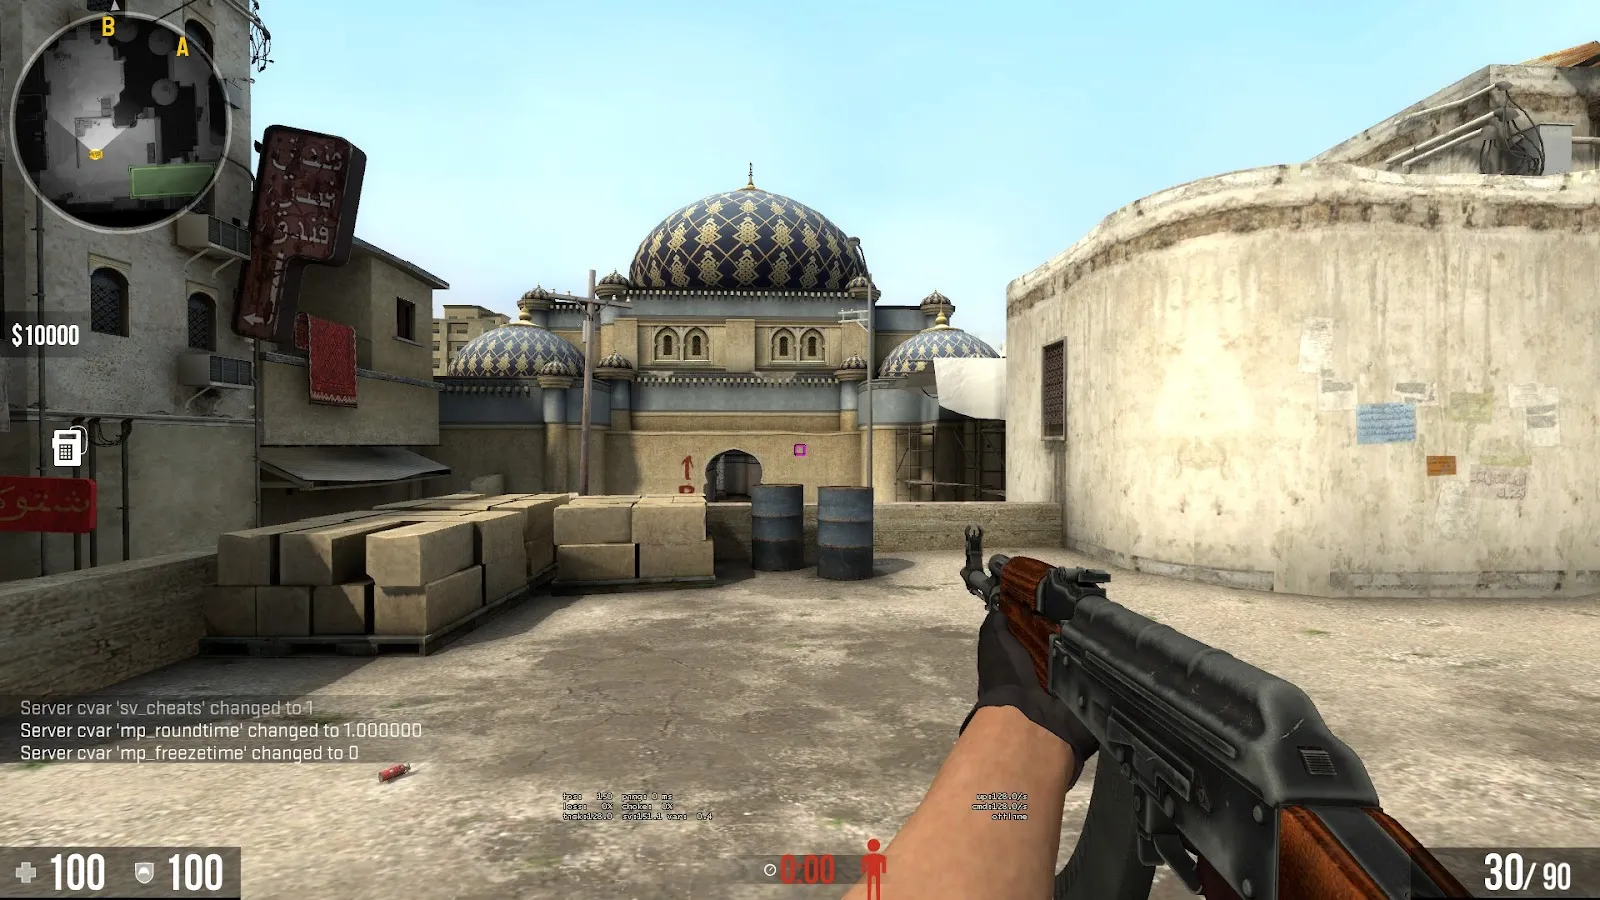 What’s The Best Way To Change Crosshair in CSGO?